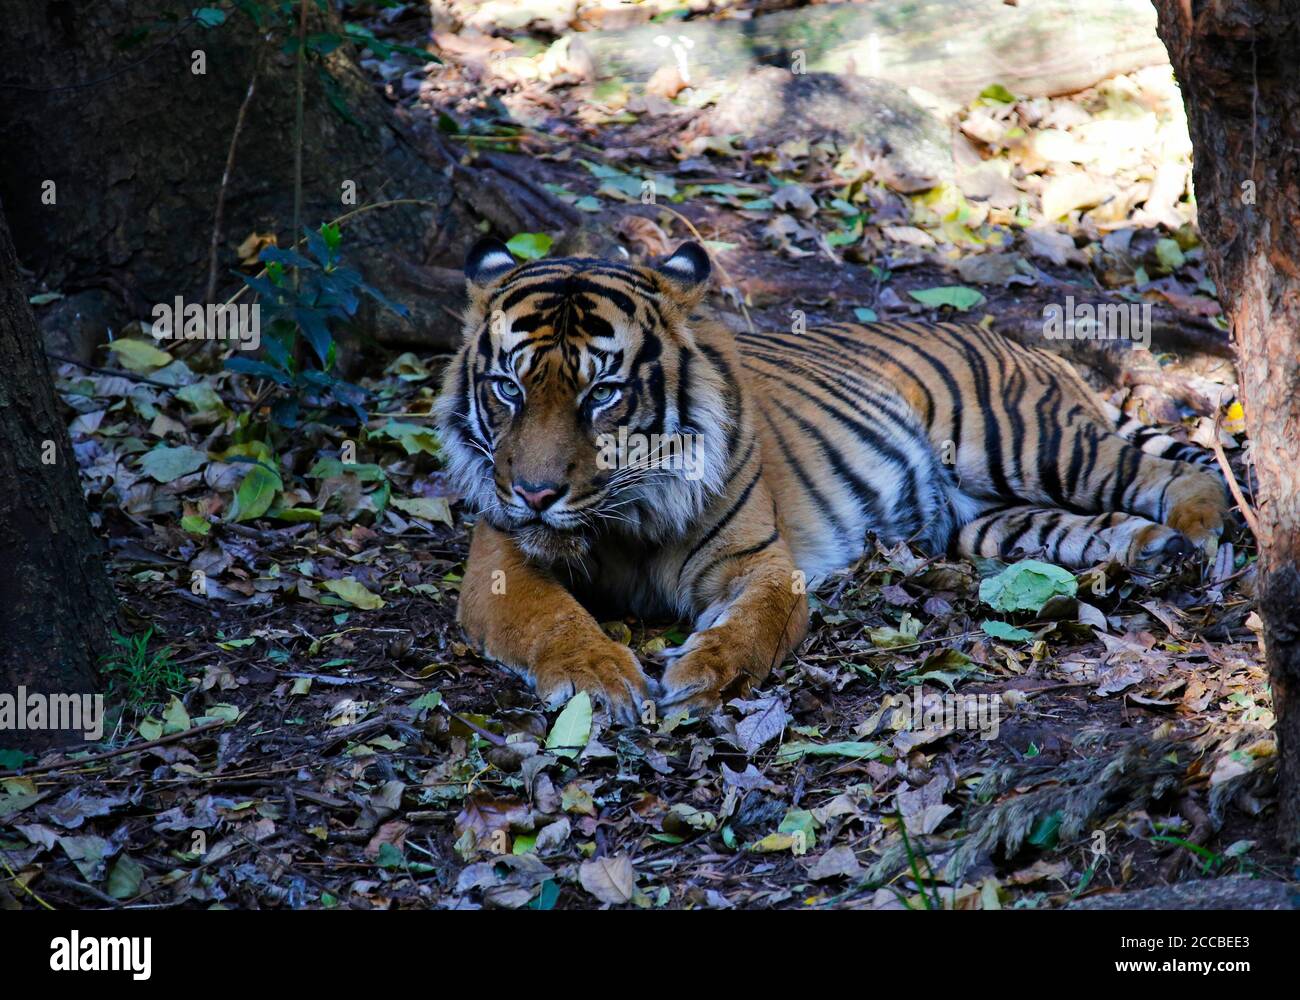 Sumatran tiger resting in a bed of leaves Stock Photo